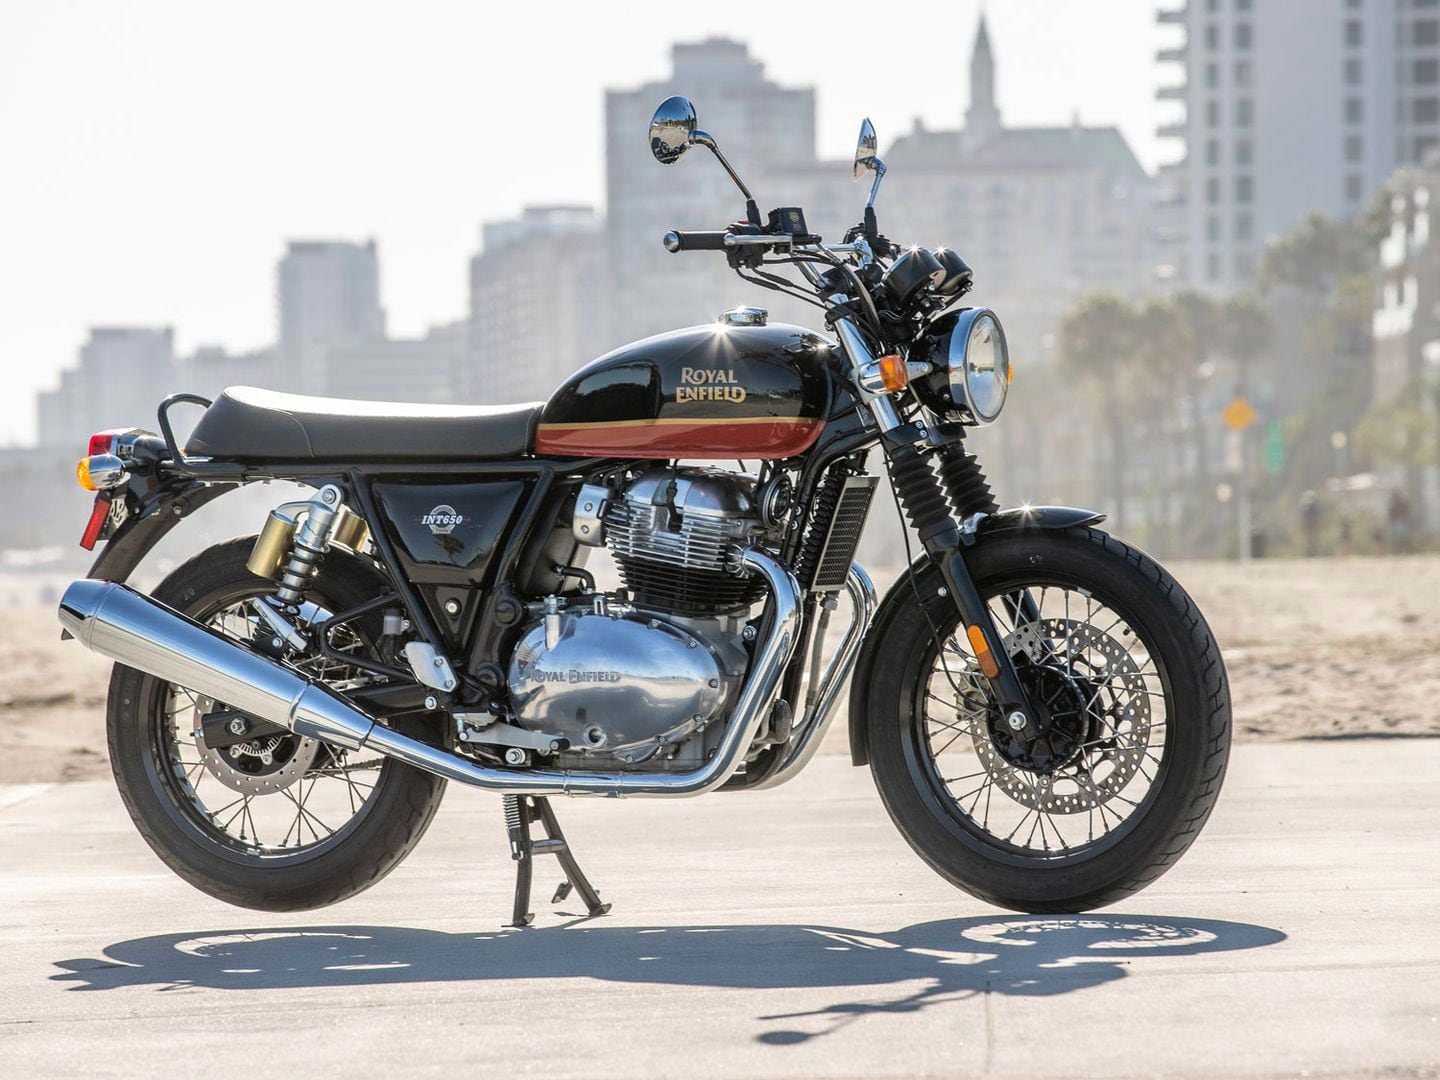 The Royal Enfield INT650 has just the right amount of technology to make it easy to live with and fun to ride for new or experienced riders, solo or with a passenger.